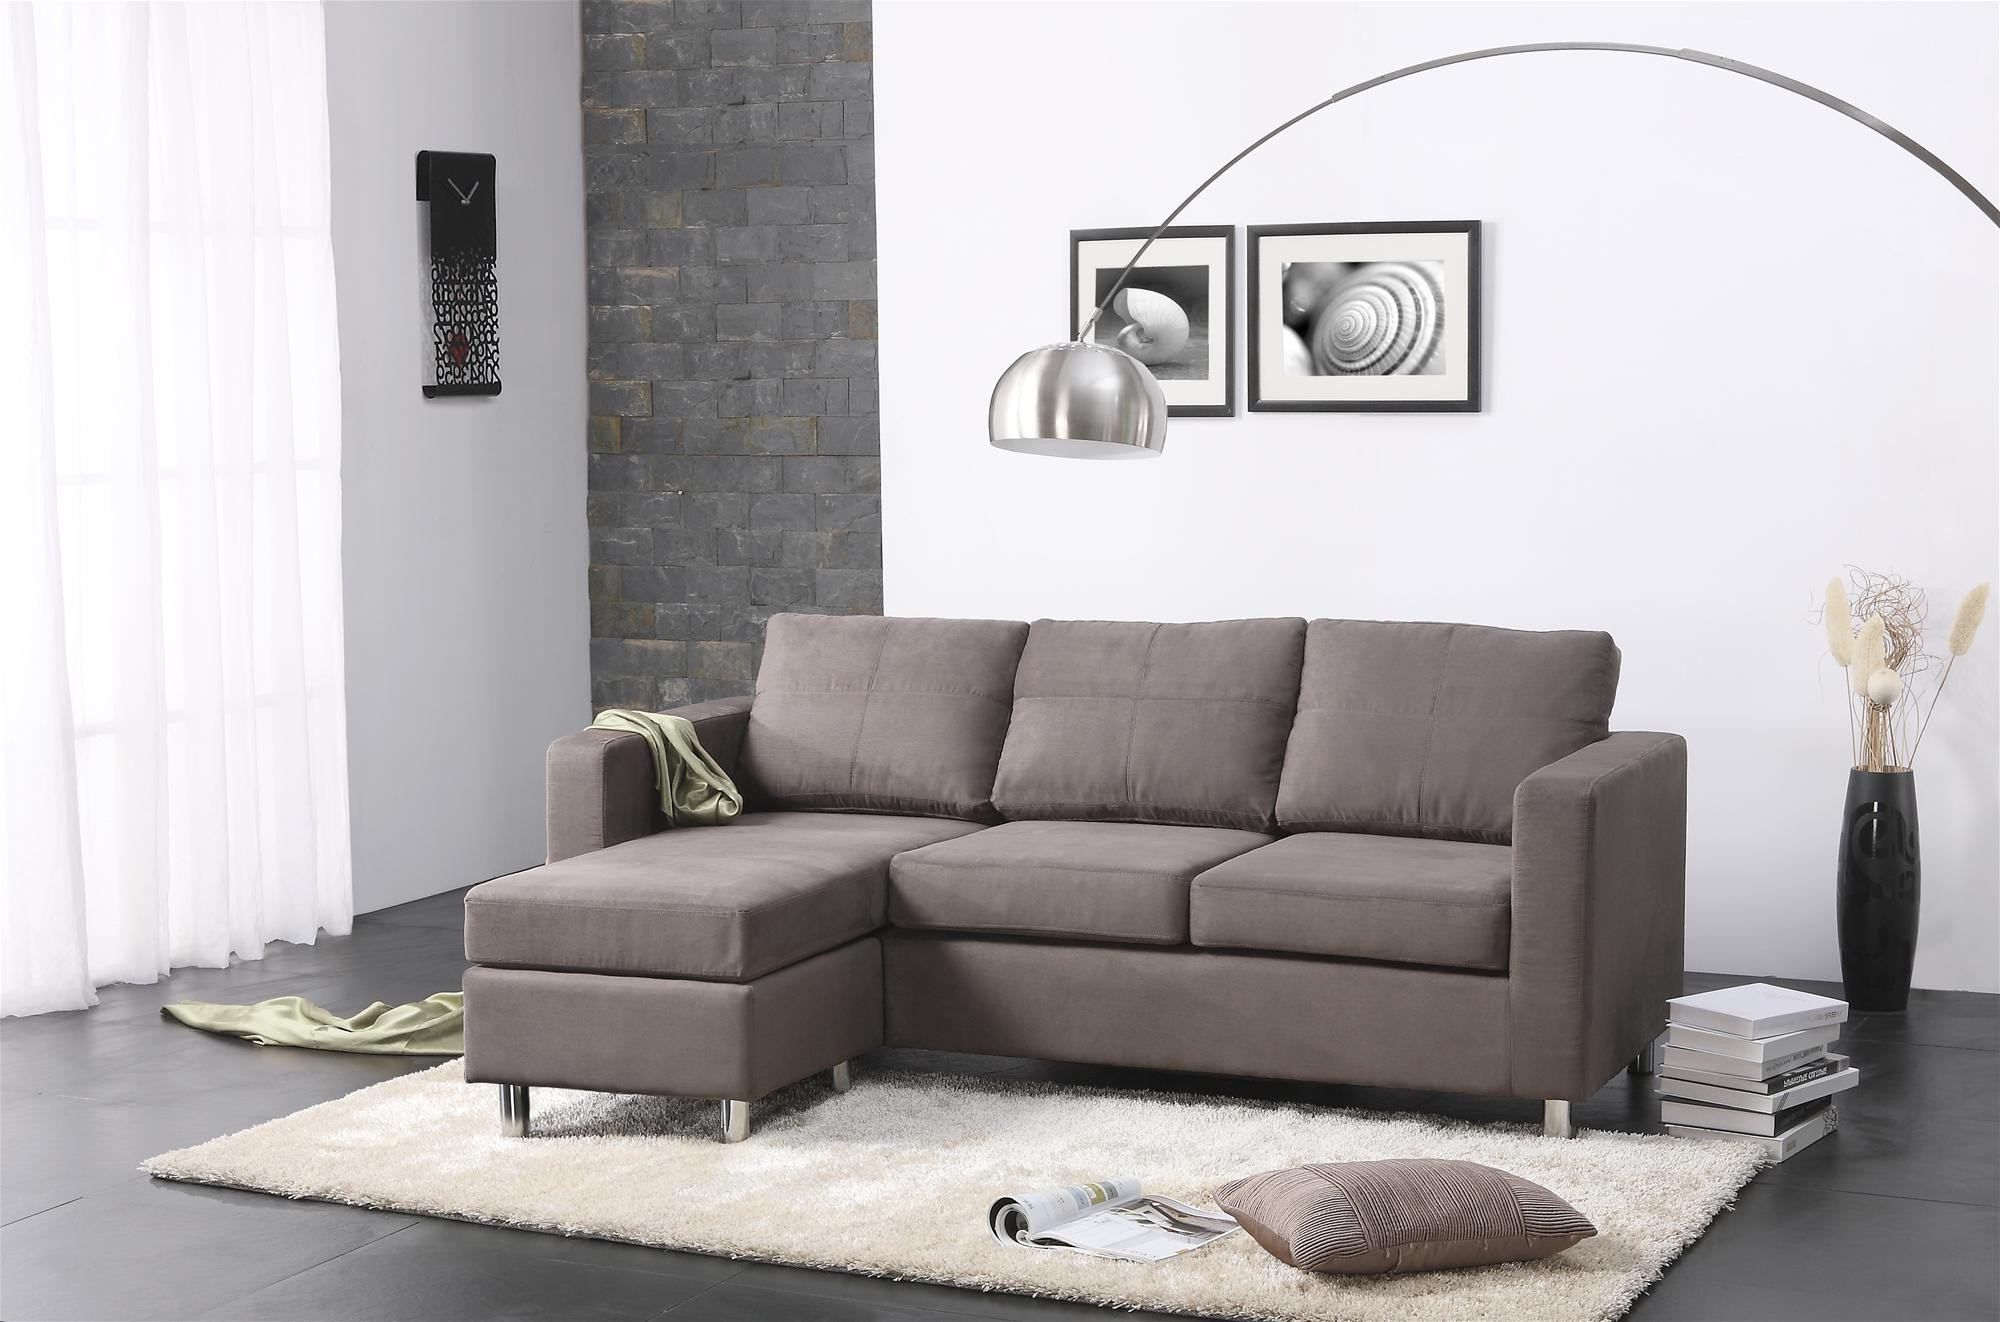 Sofa Style For A Small Living Room